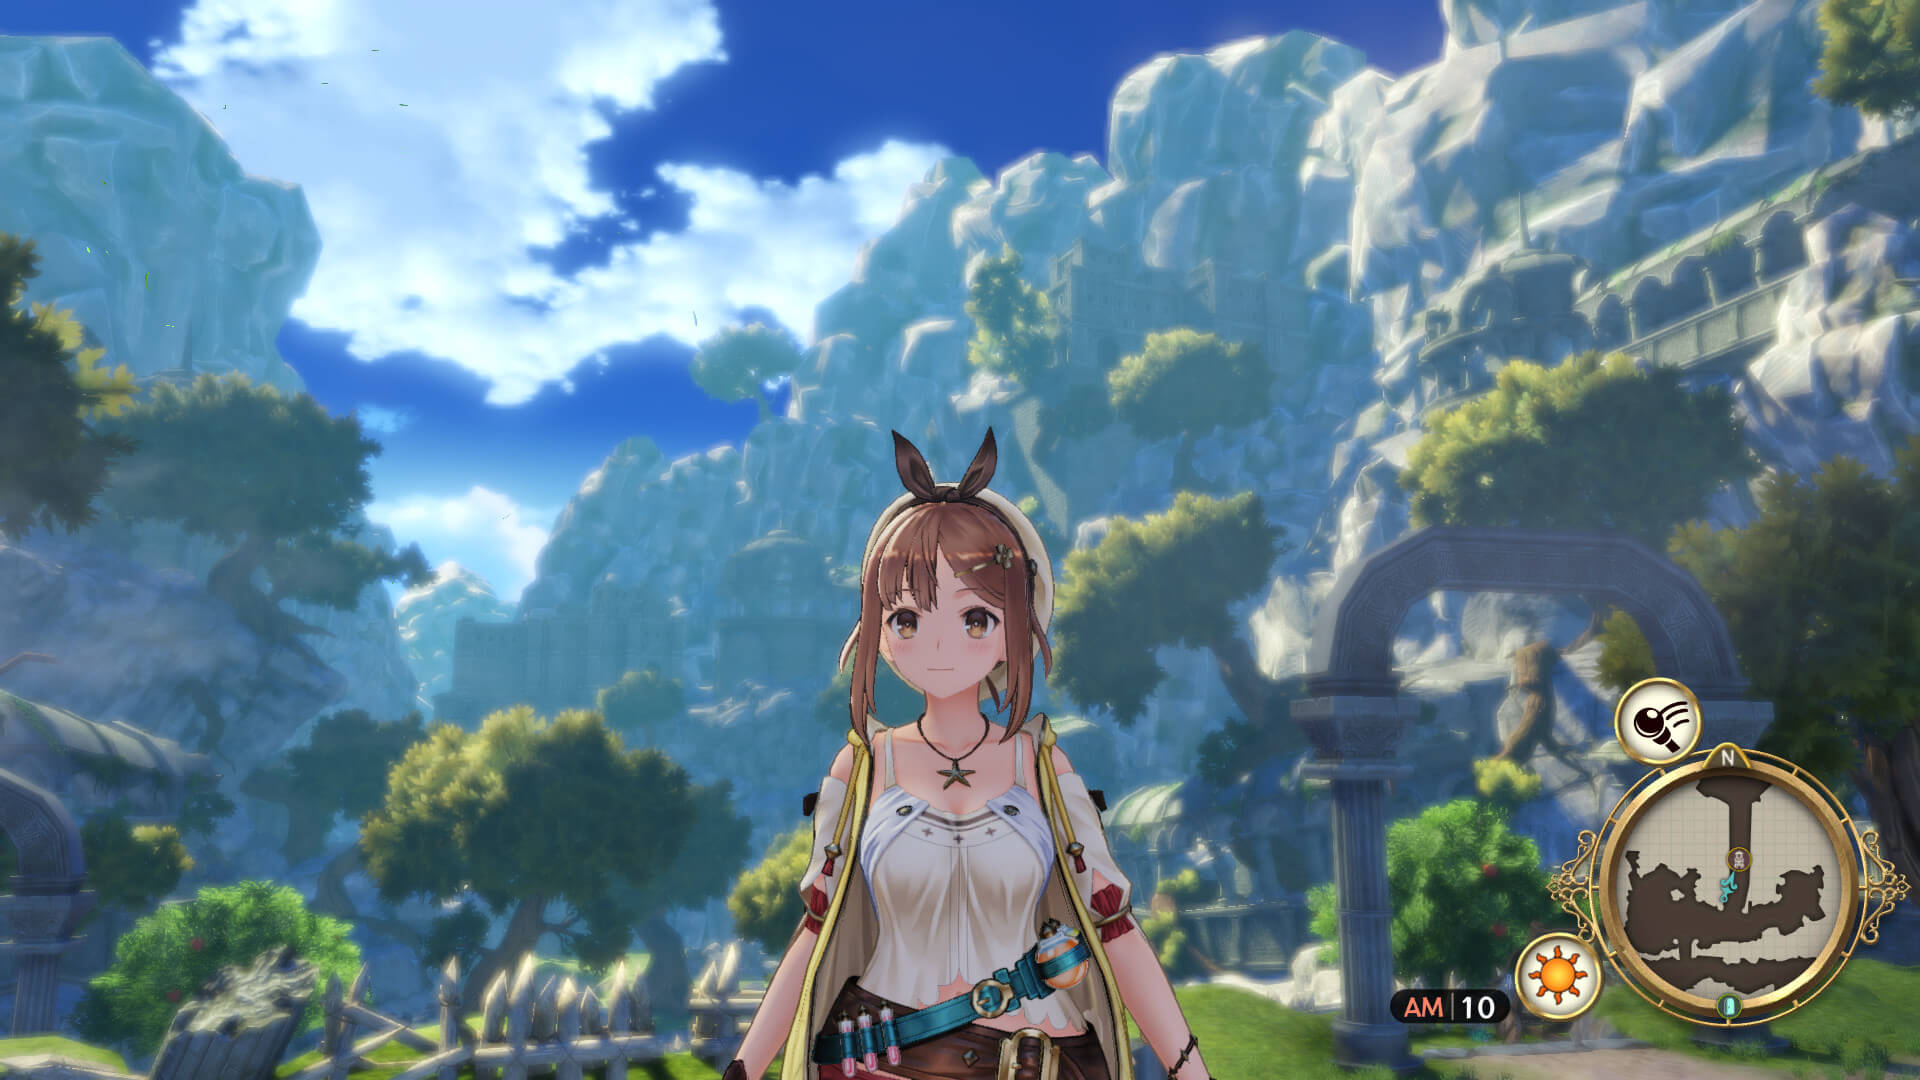 Atelier Ryza 3: How to craft and use Catcher's Net